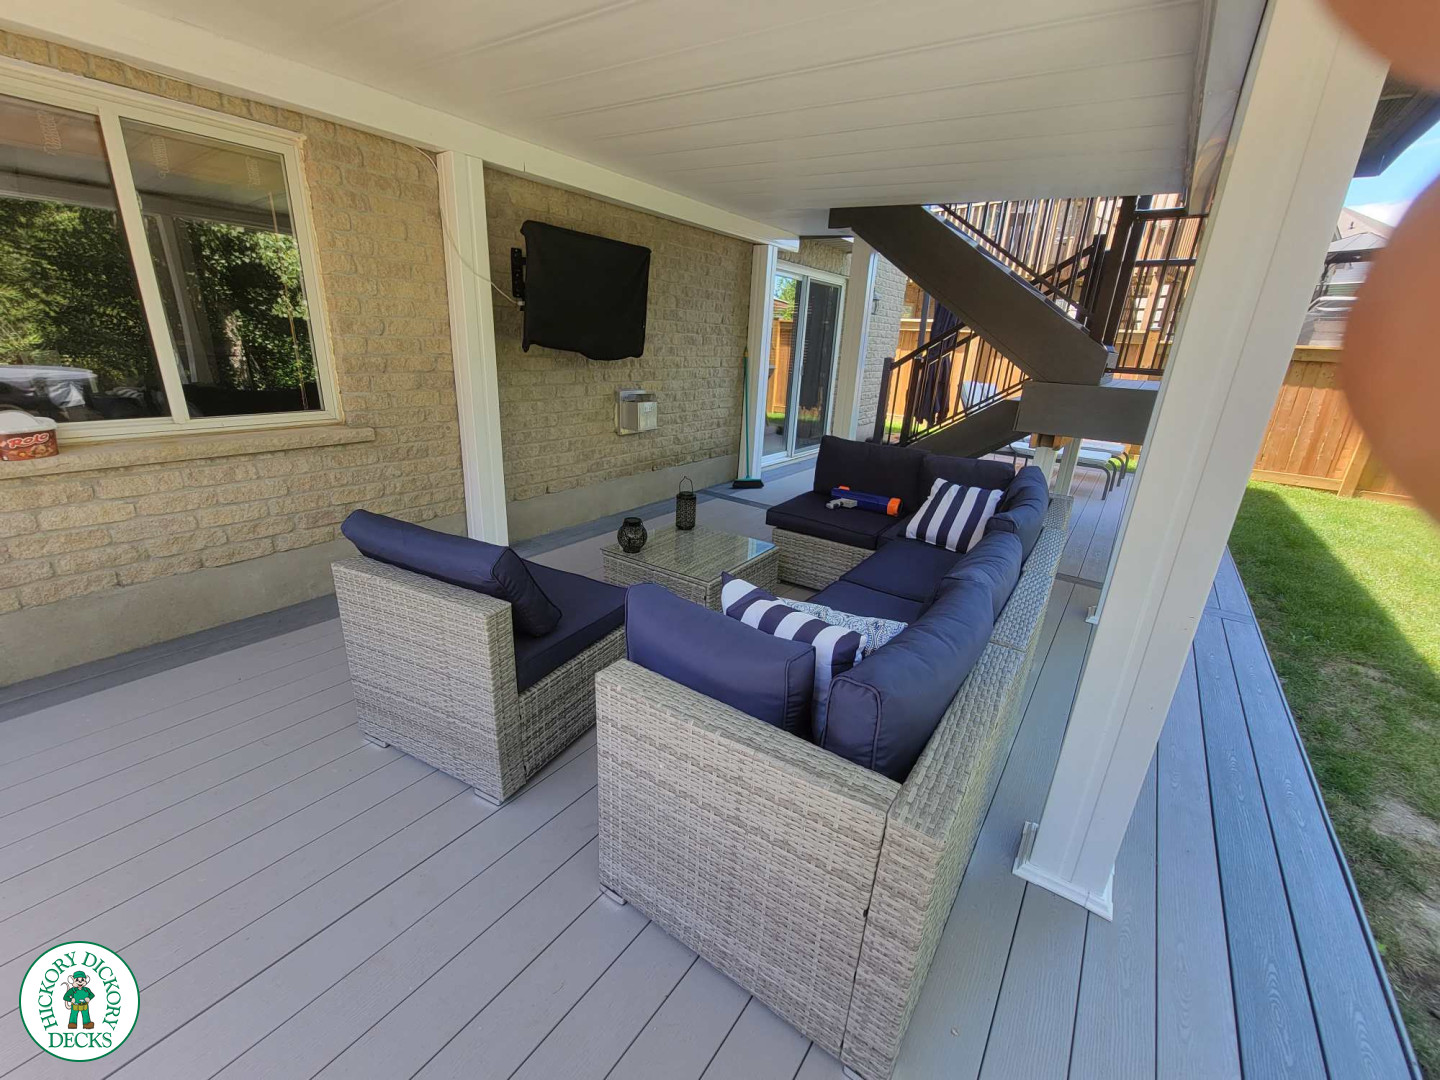 Multi level grey clubhouse deck with dark grey border and glass privacy screens on the top level.